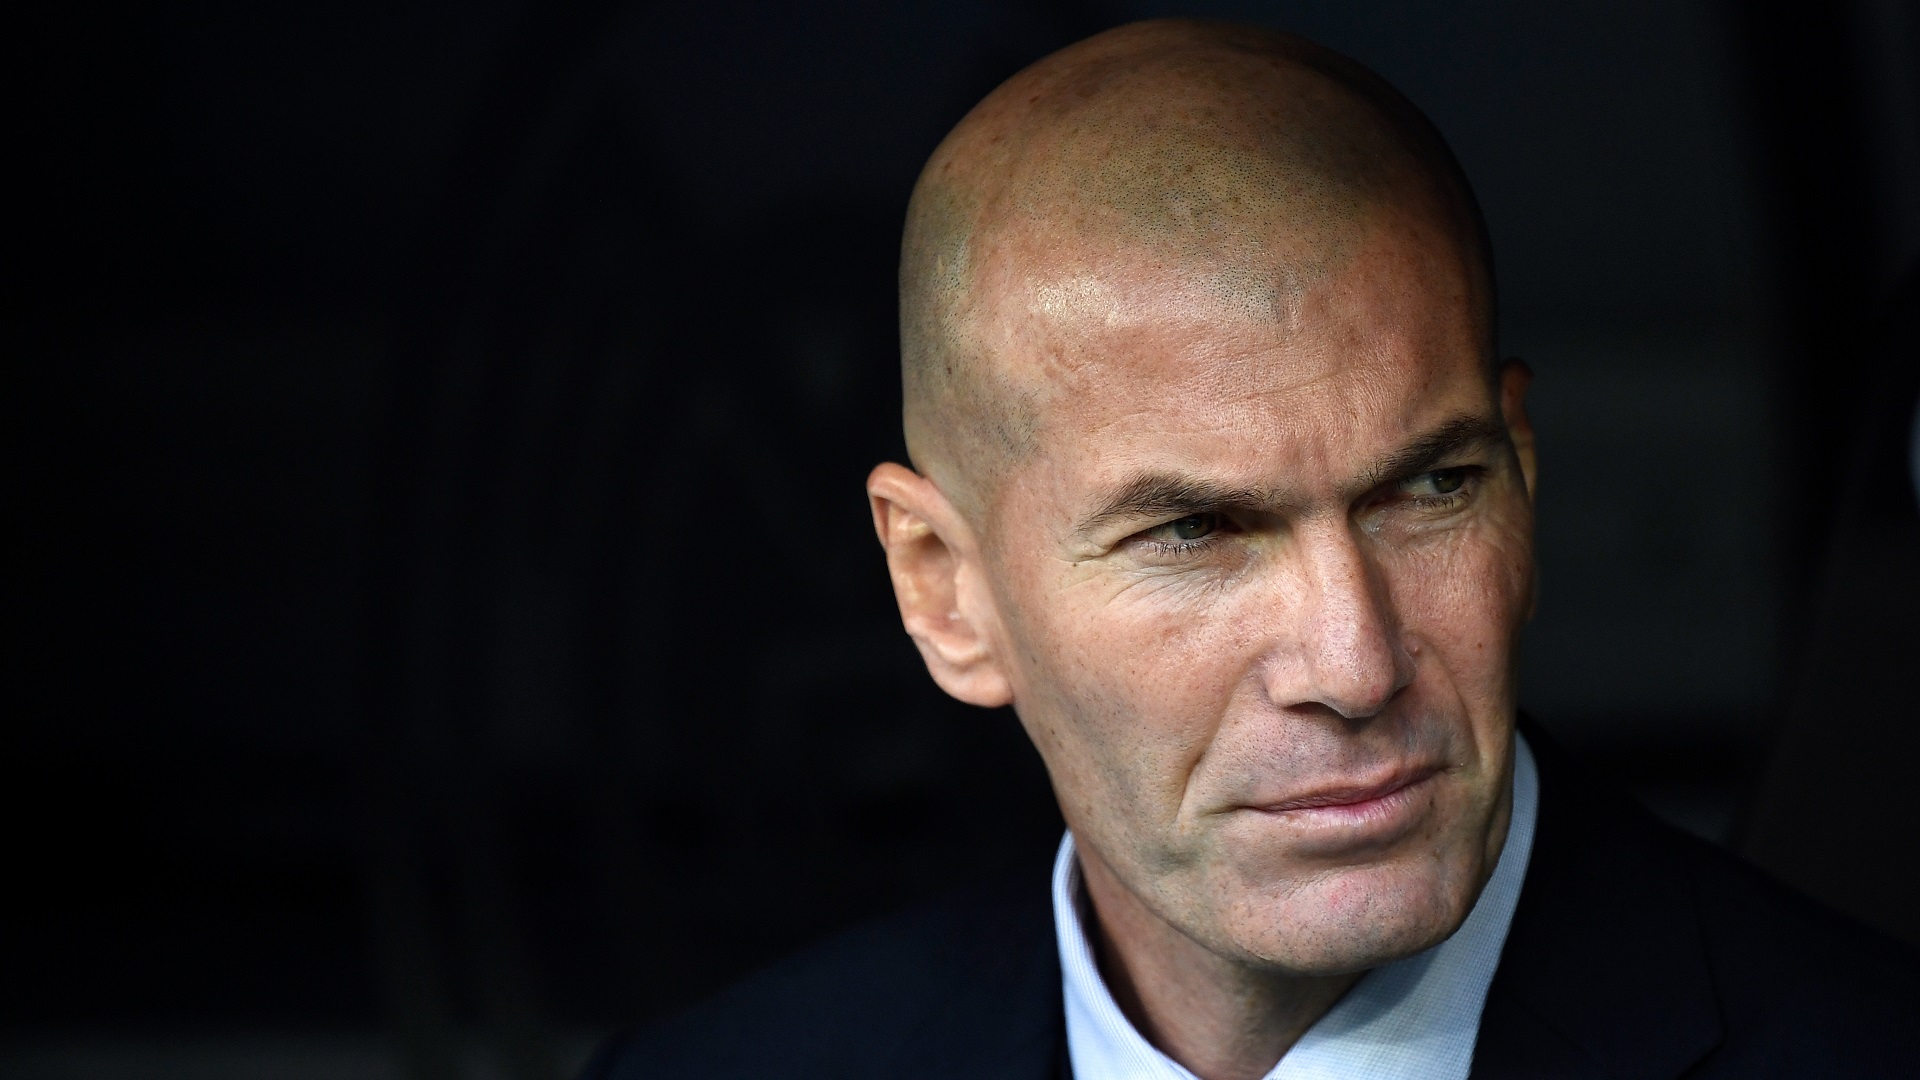 'It takes a lot out of you' - Zidane admits uncertainty over Real Madrid future